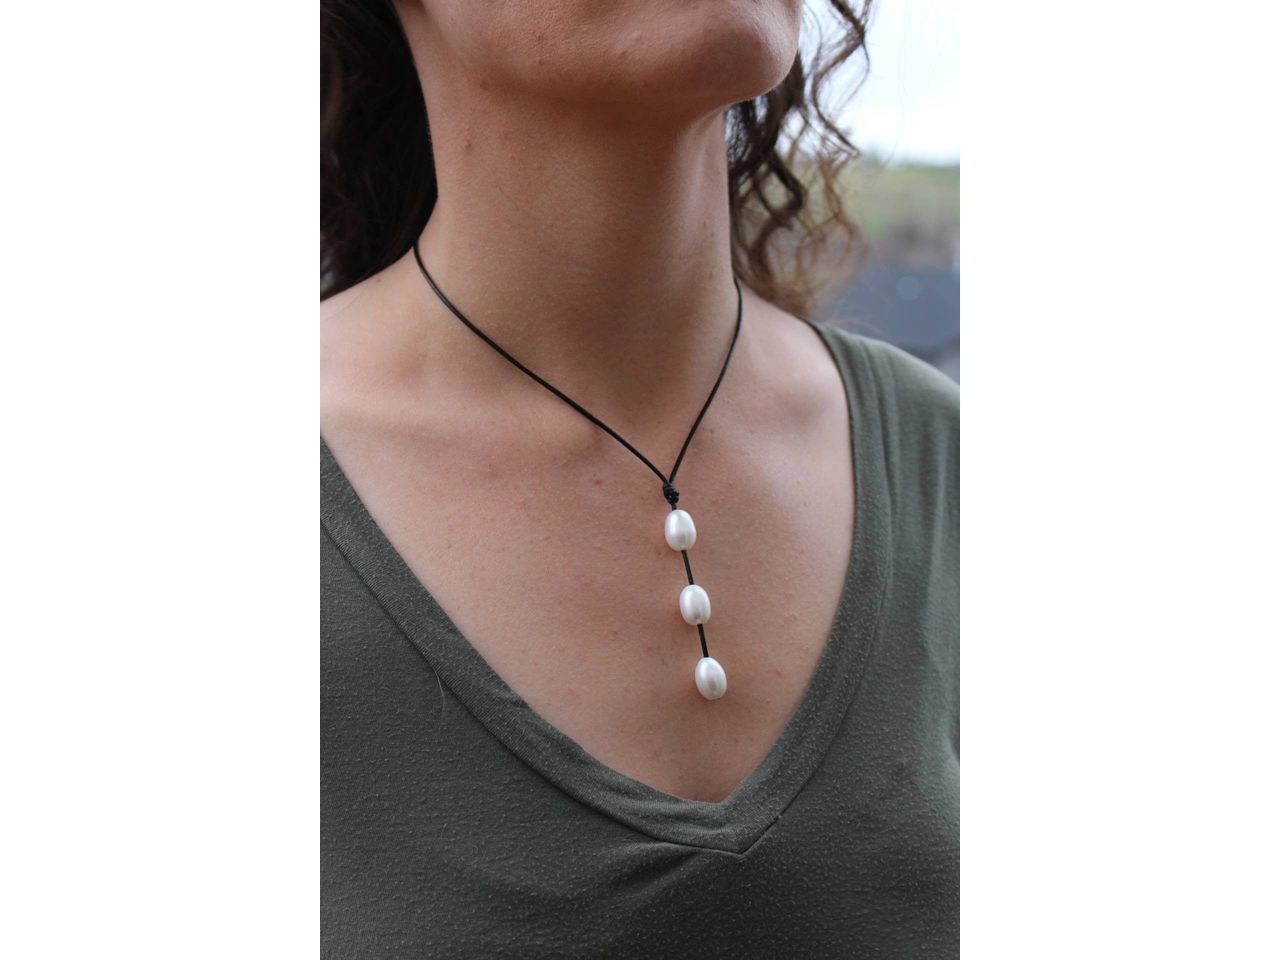 Leather Pearl lariat Y necklace, 3rd Anniversary gift for wife, June Birthstone jewelry